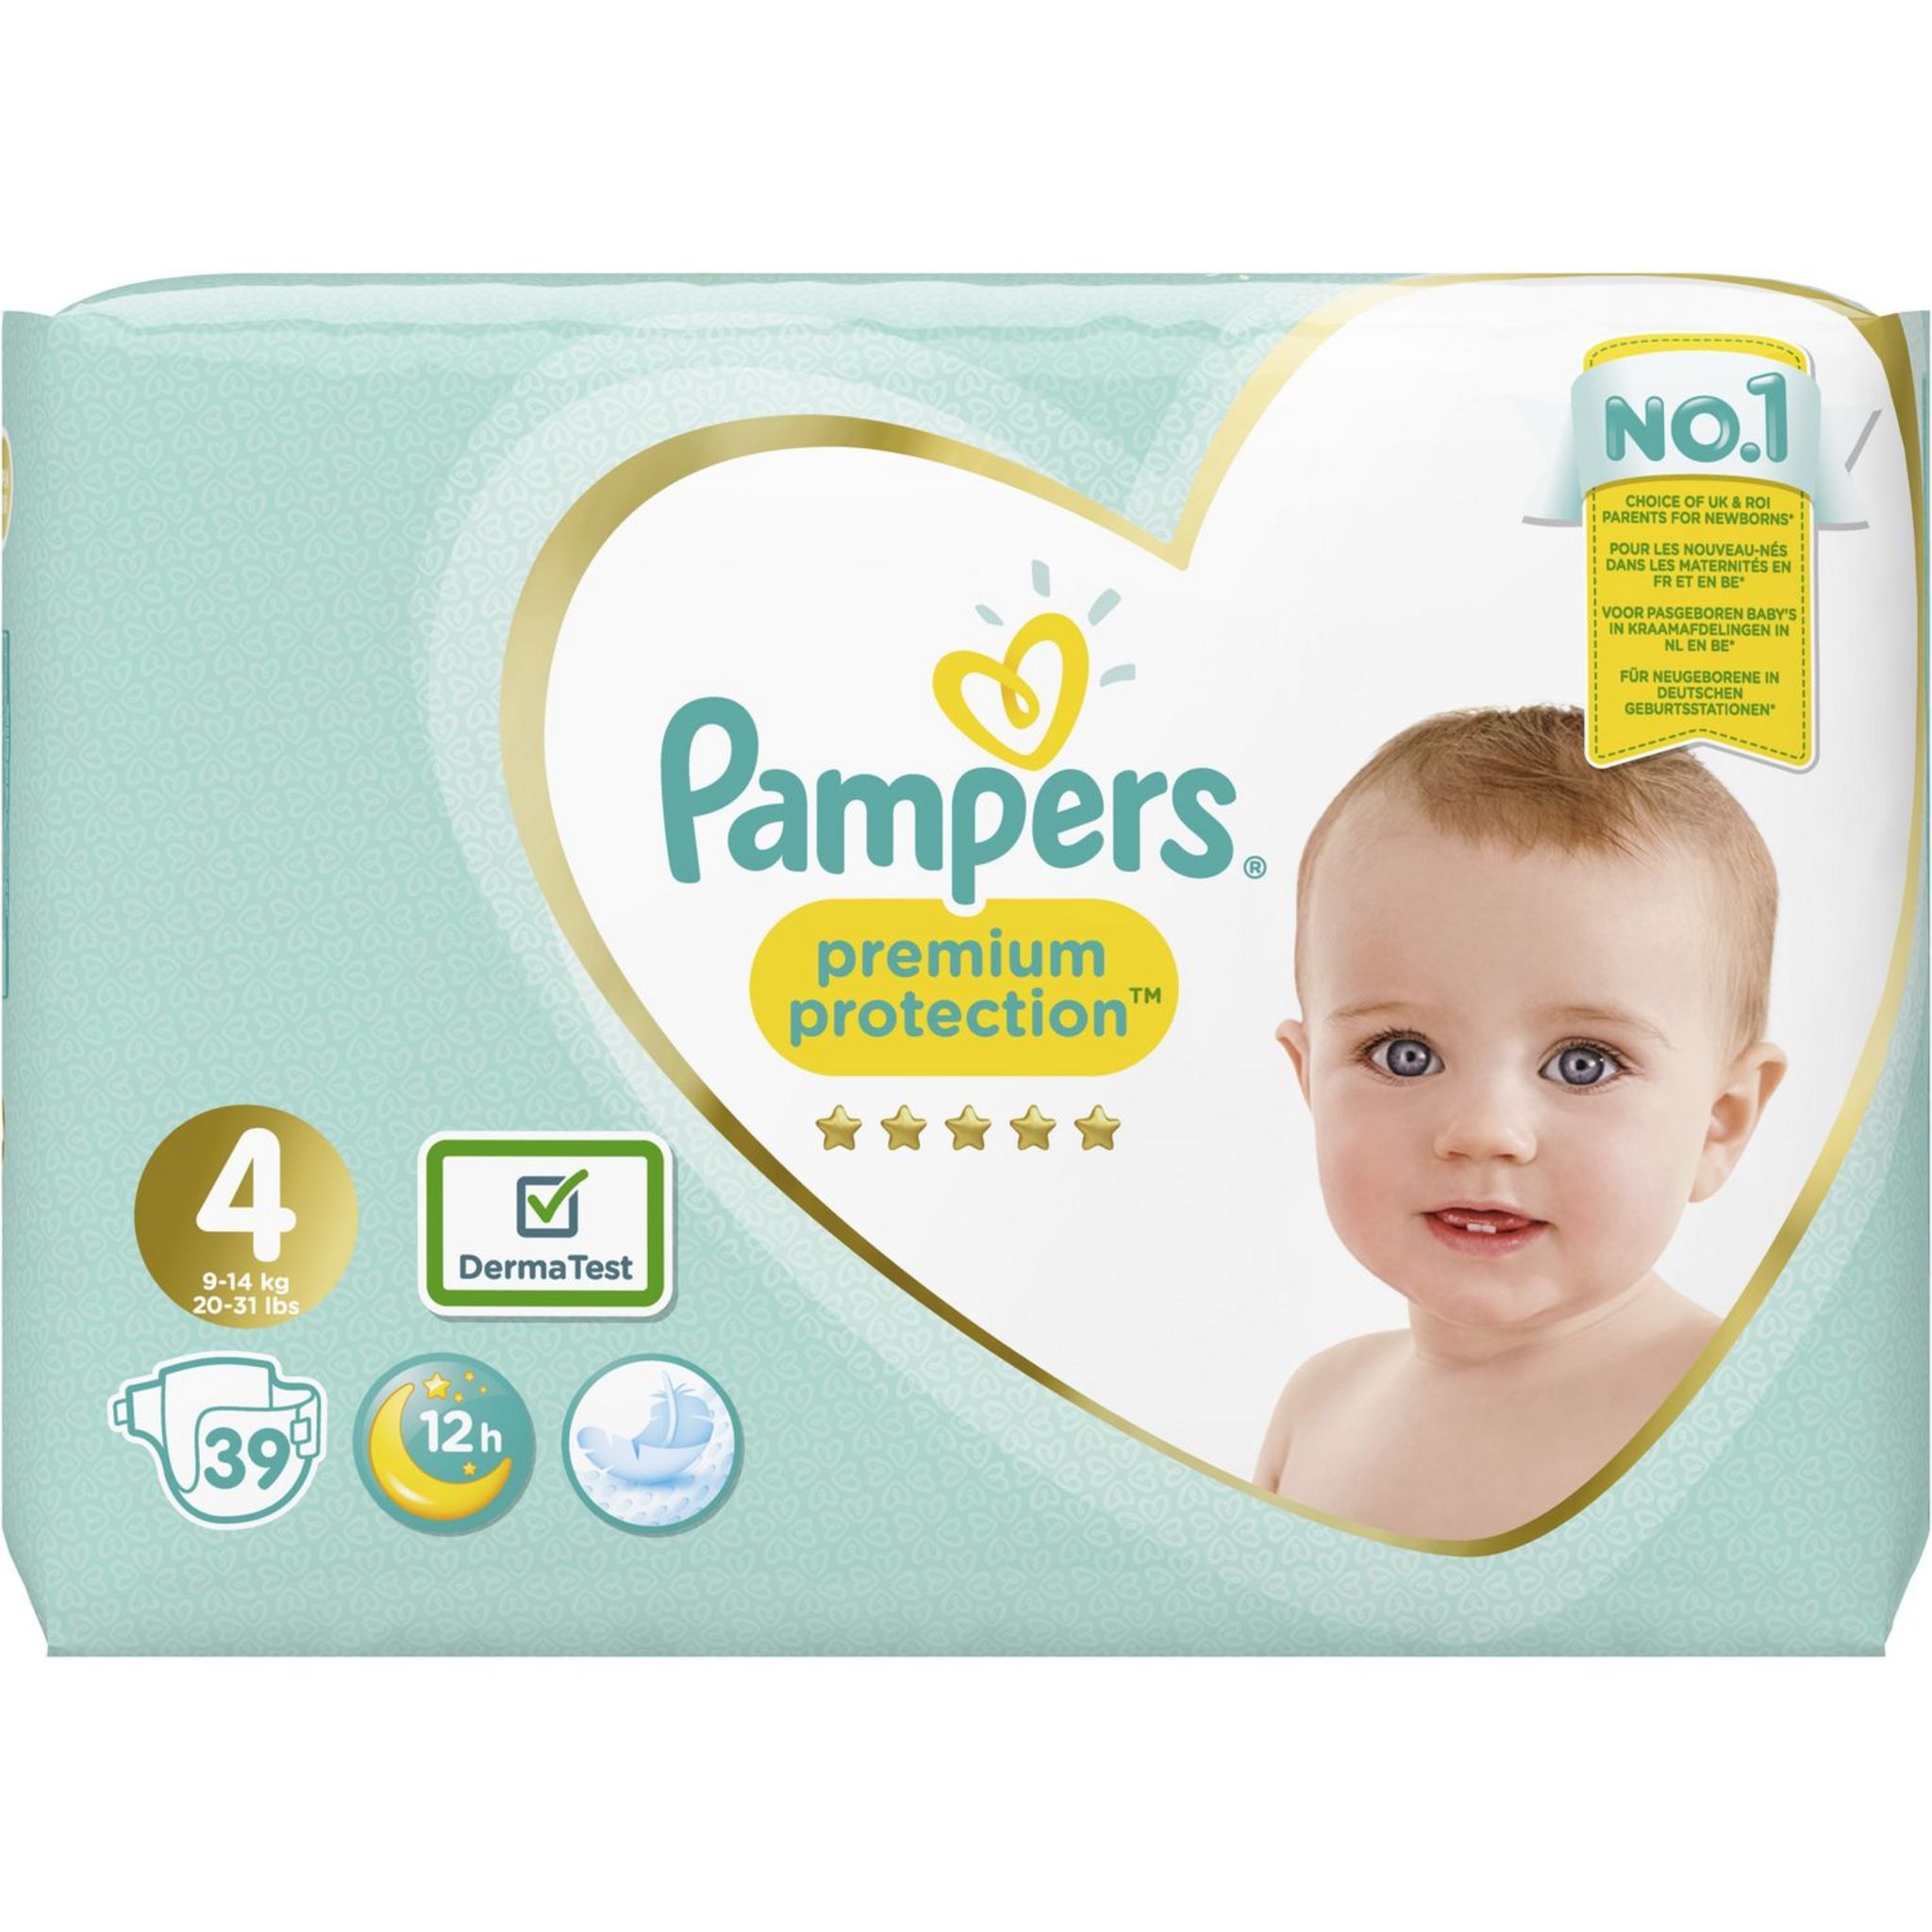 PAMPERS Premium protection géant couches taille 4 (9-14kg) 39